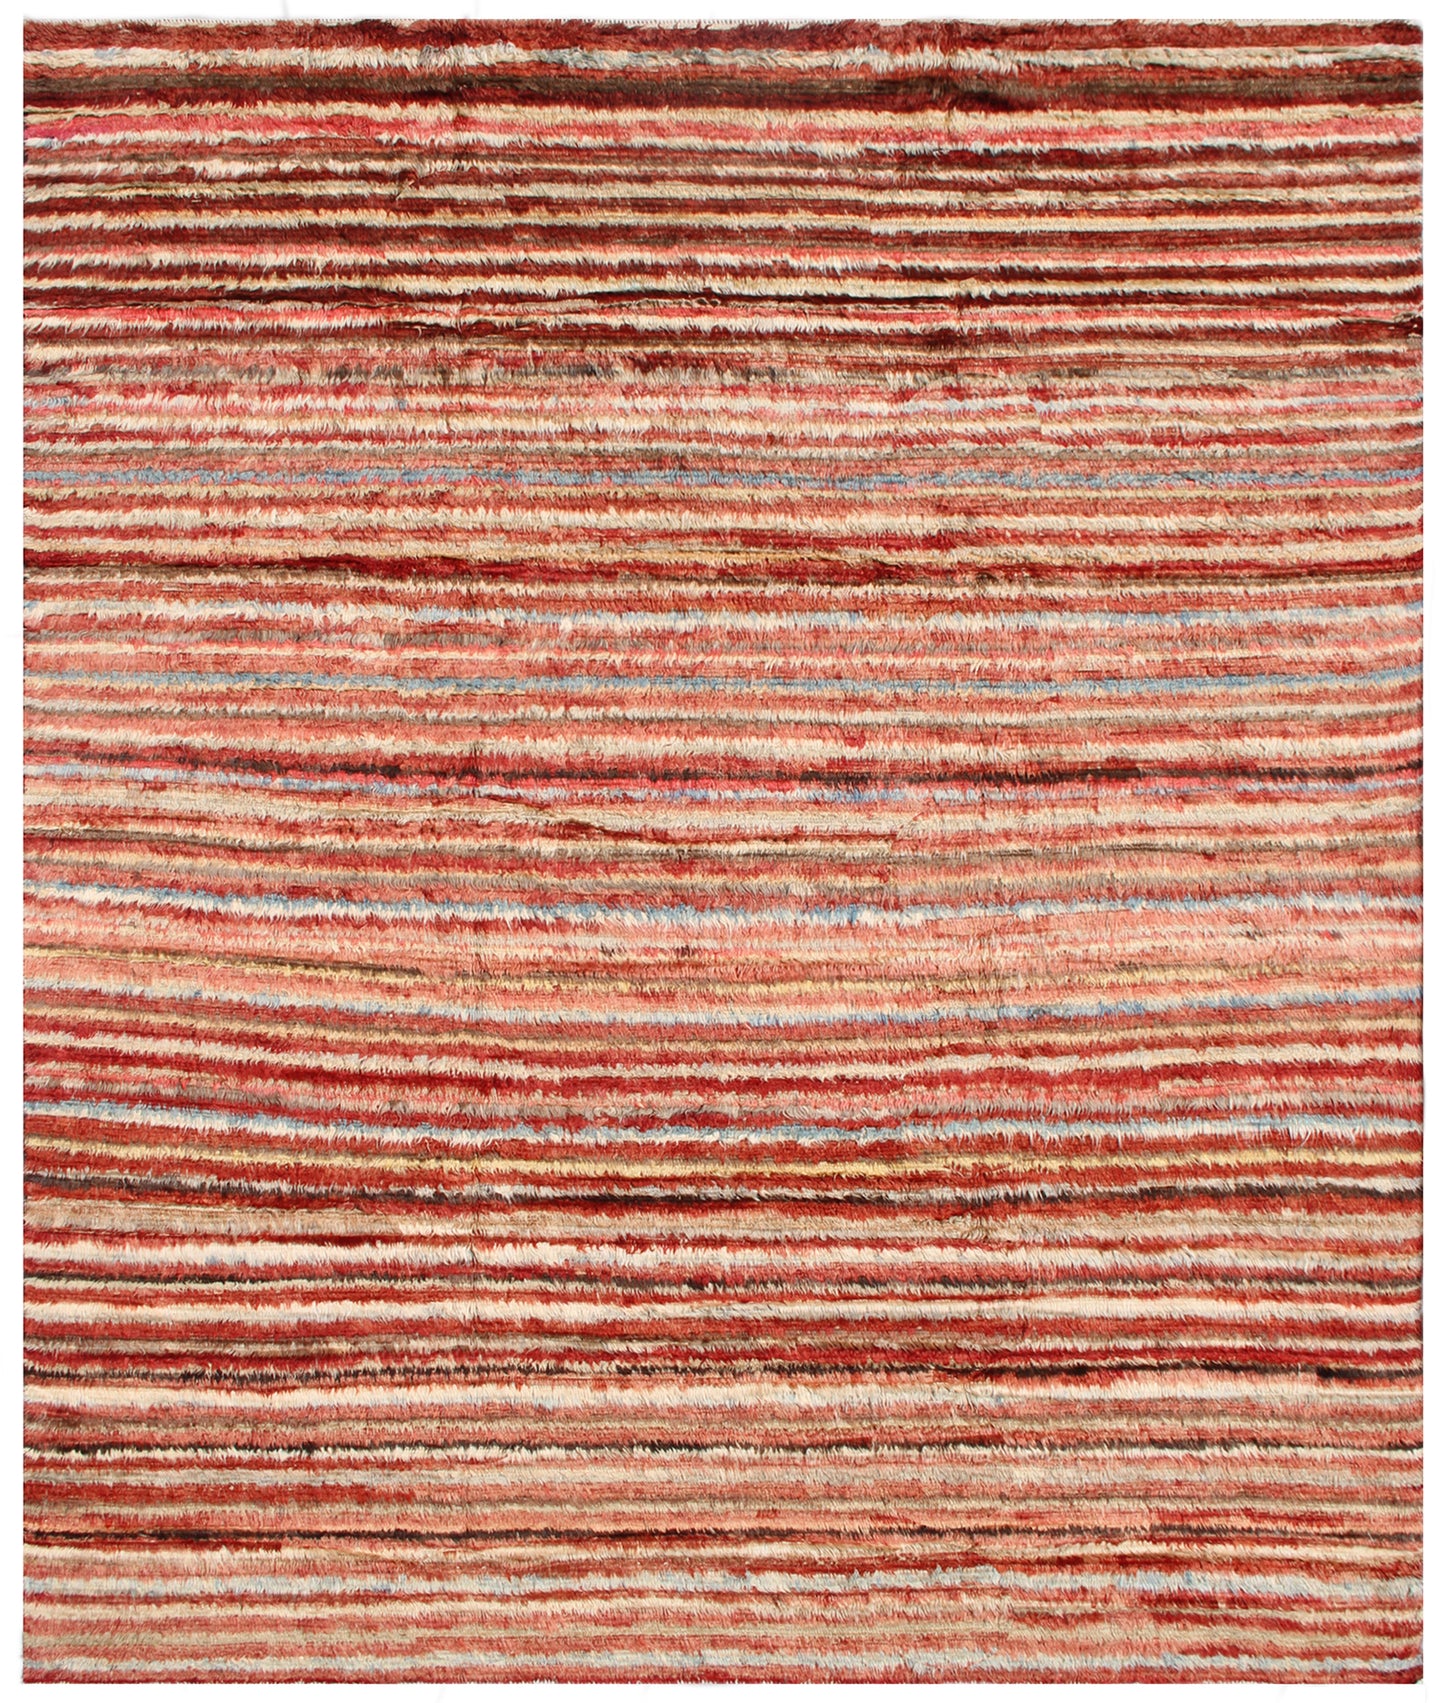 9'x12' Ariana Moroccan Style Striped Rustic Red Blue Yellow Barchi Area Rug